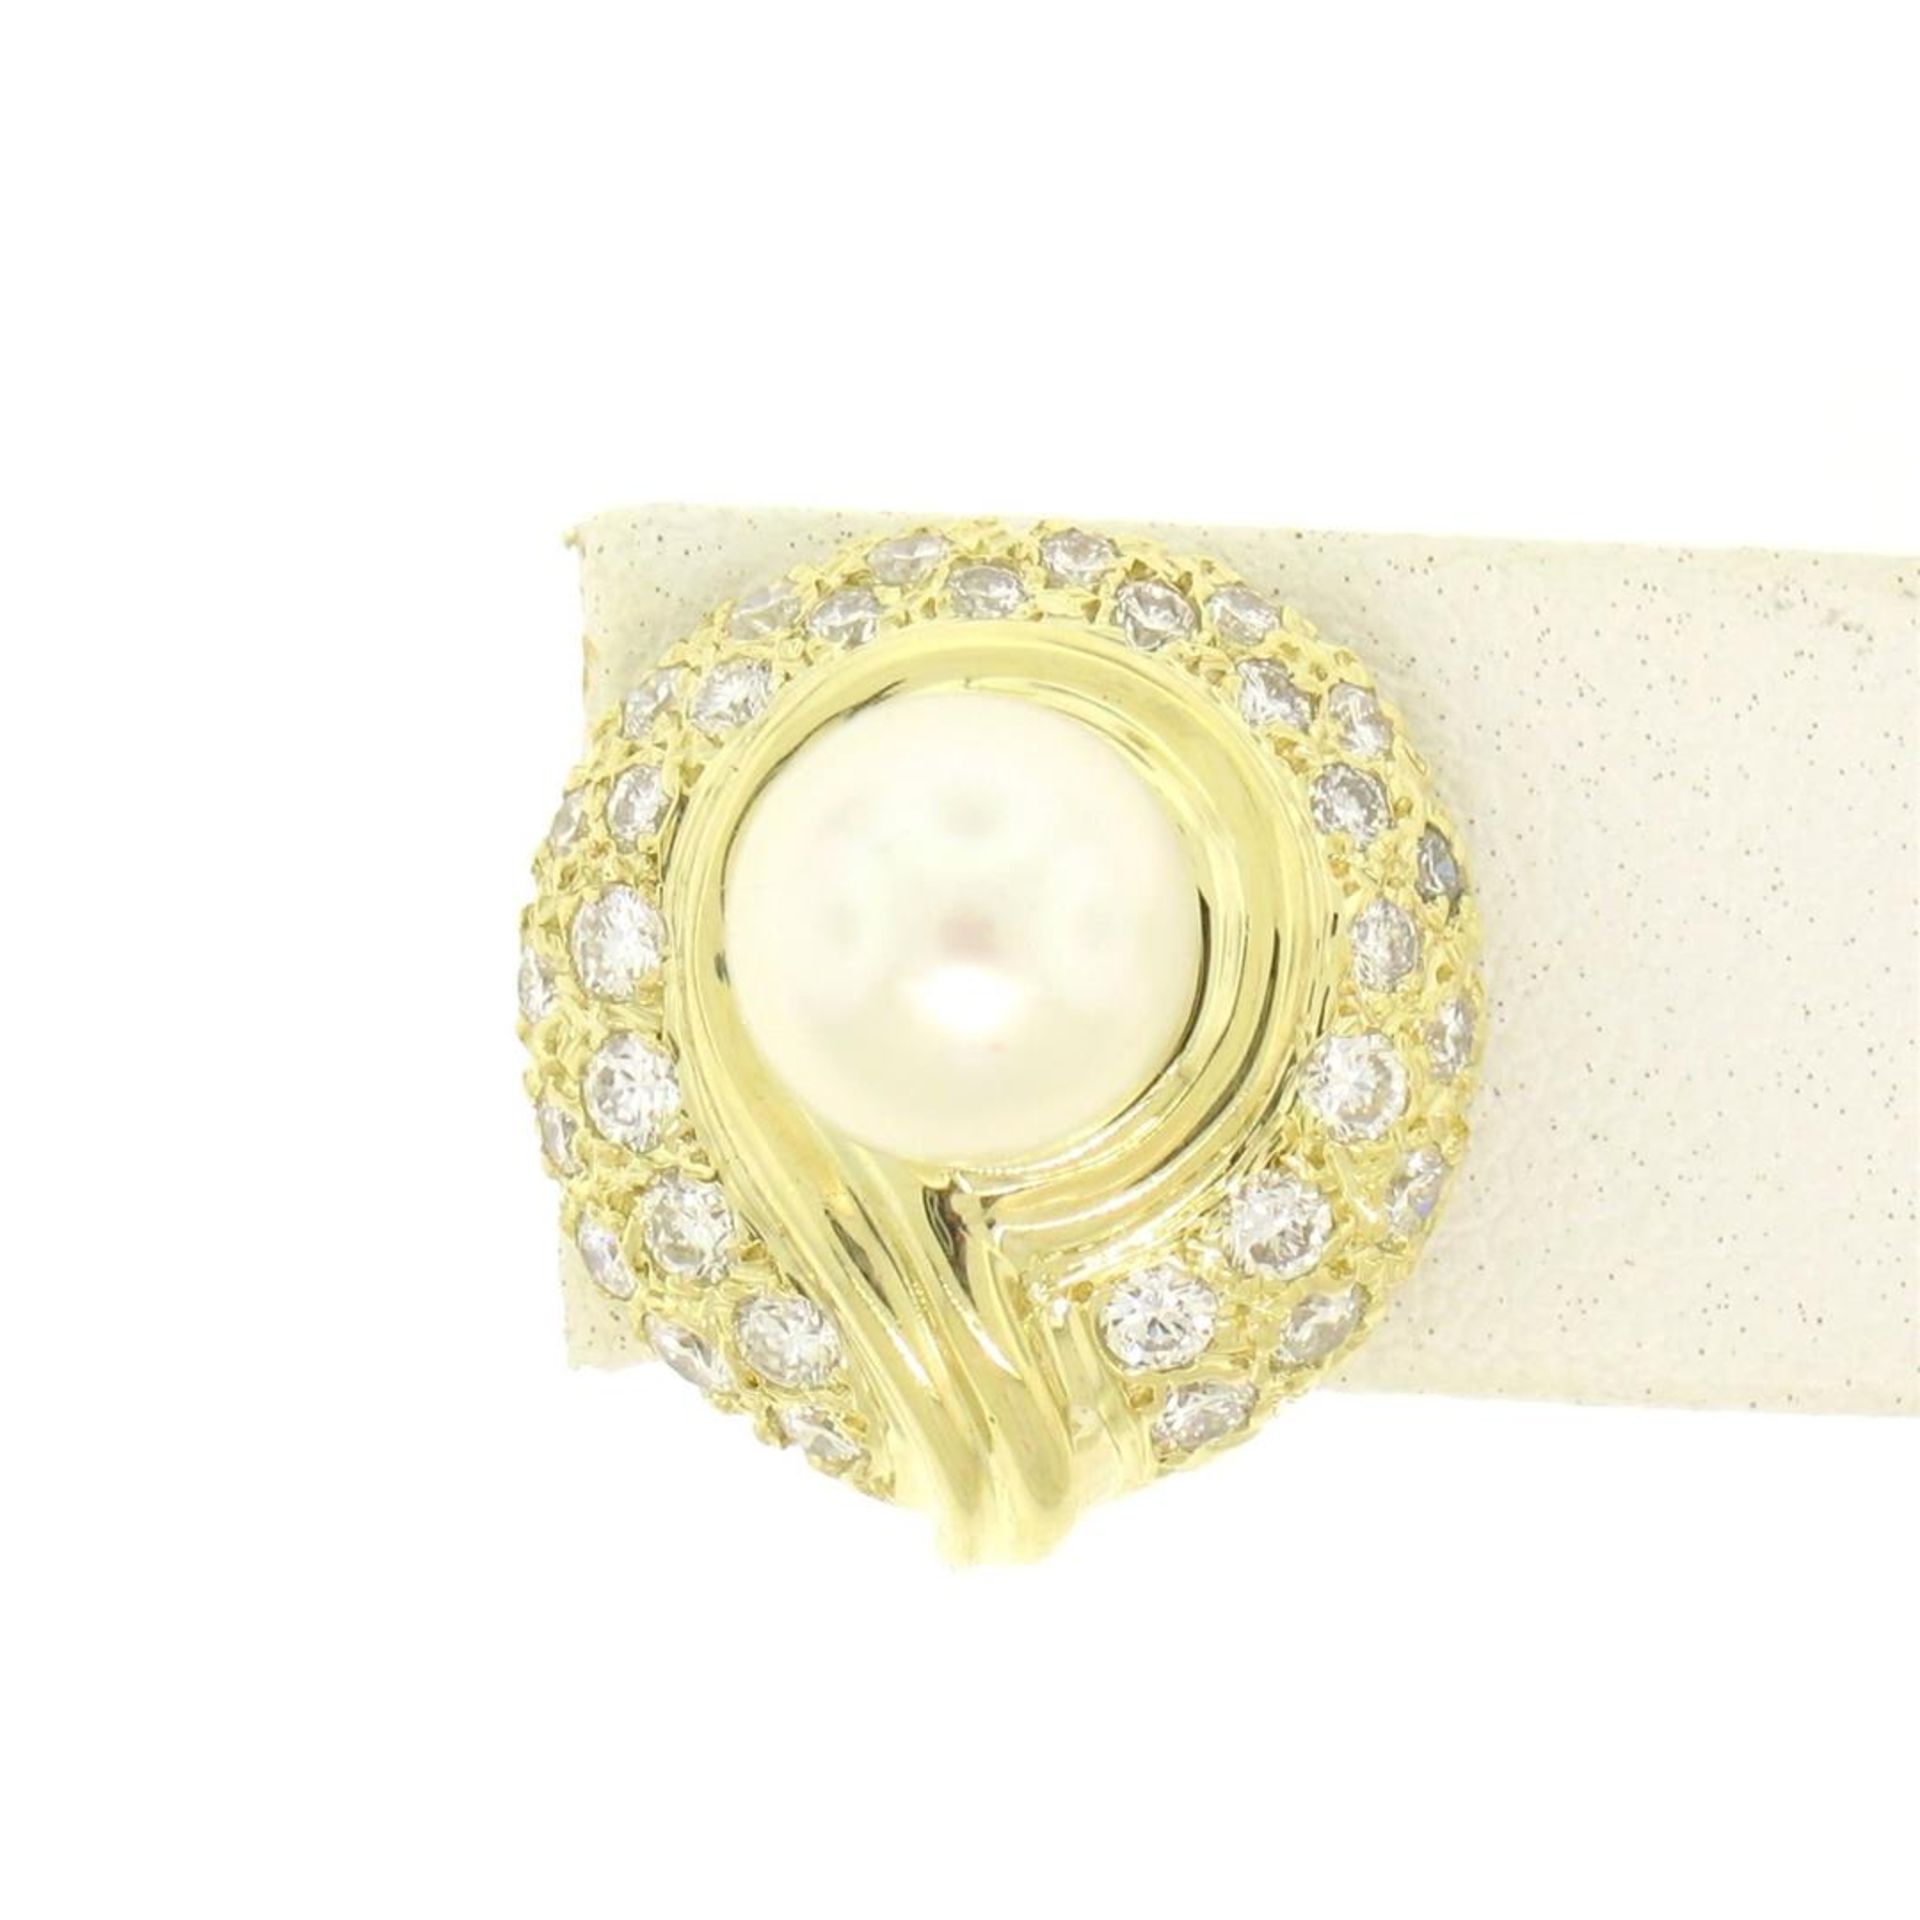 18kt Yellow Gold 1.25 ctw Cultured Pearl and Diamond Button Earrings - Image 5 of 9